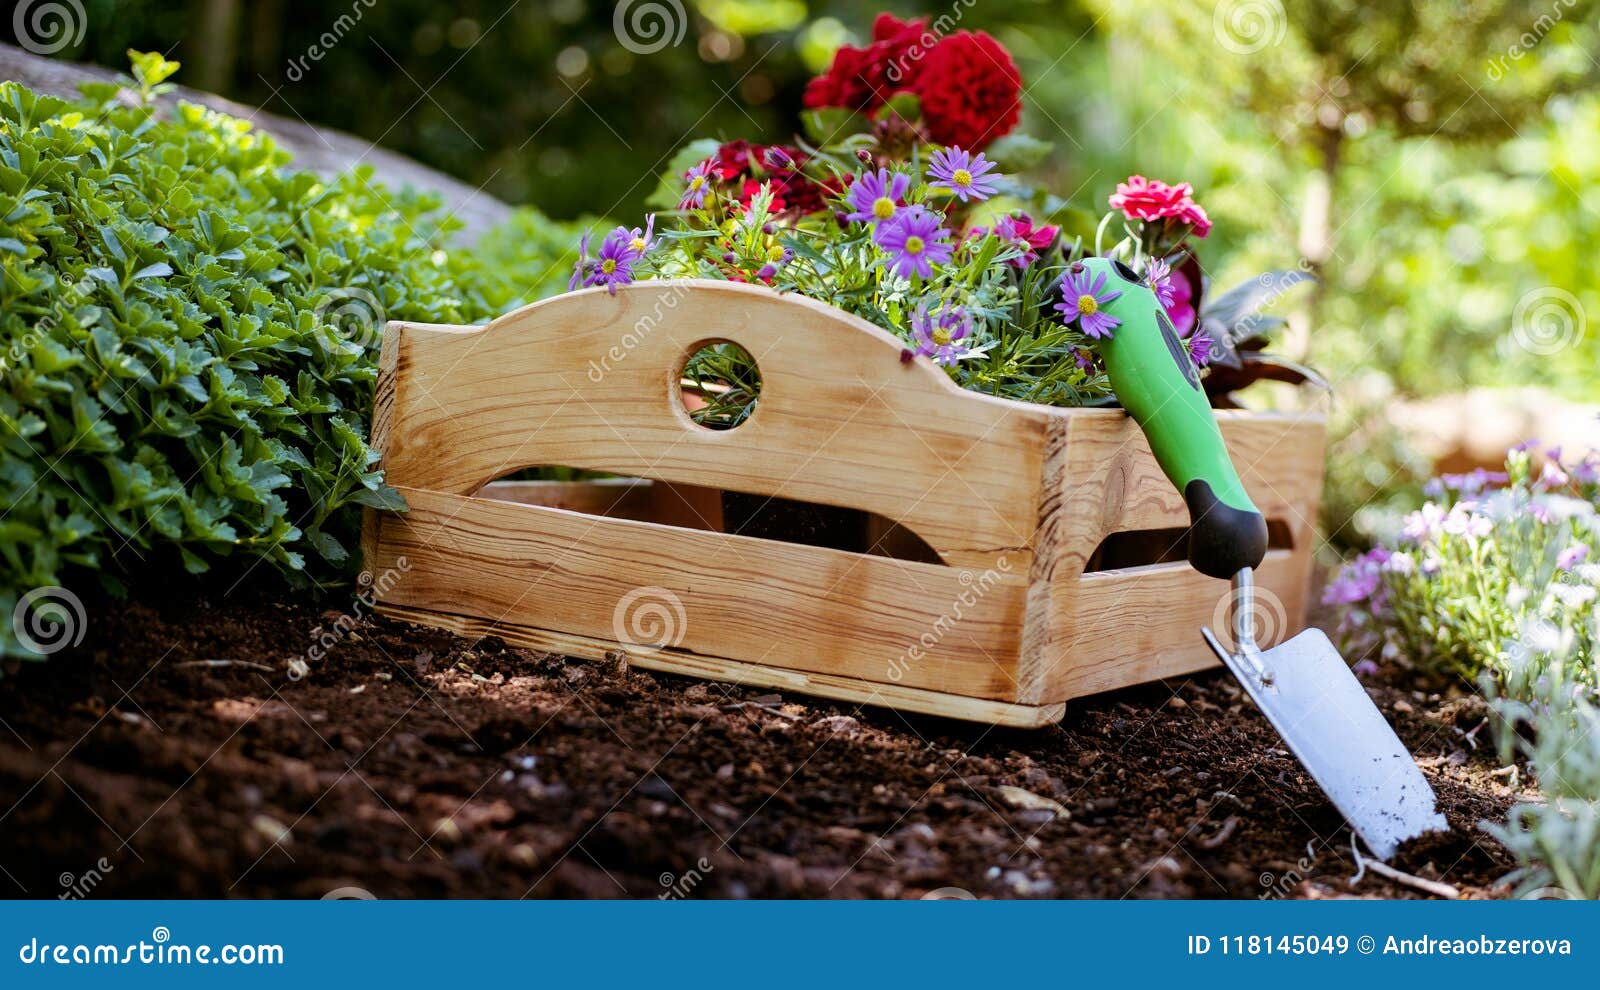 gardening. garden tools and crate full of gorgeous plants ready for planting in sunny garden. spring garden works concept.